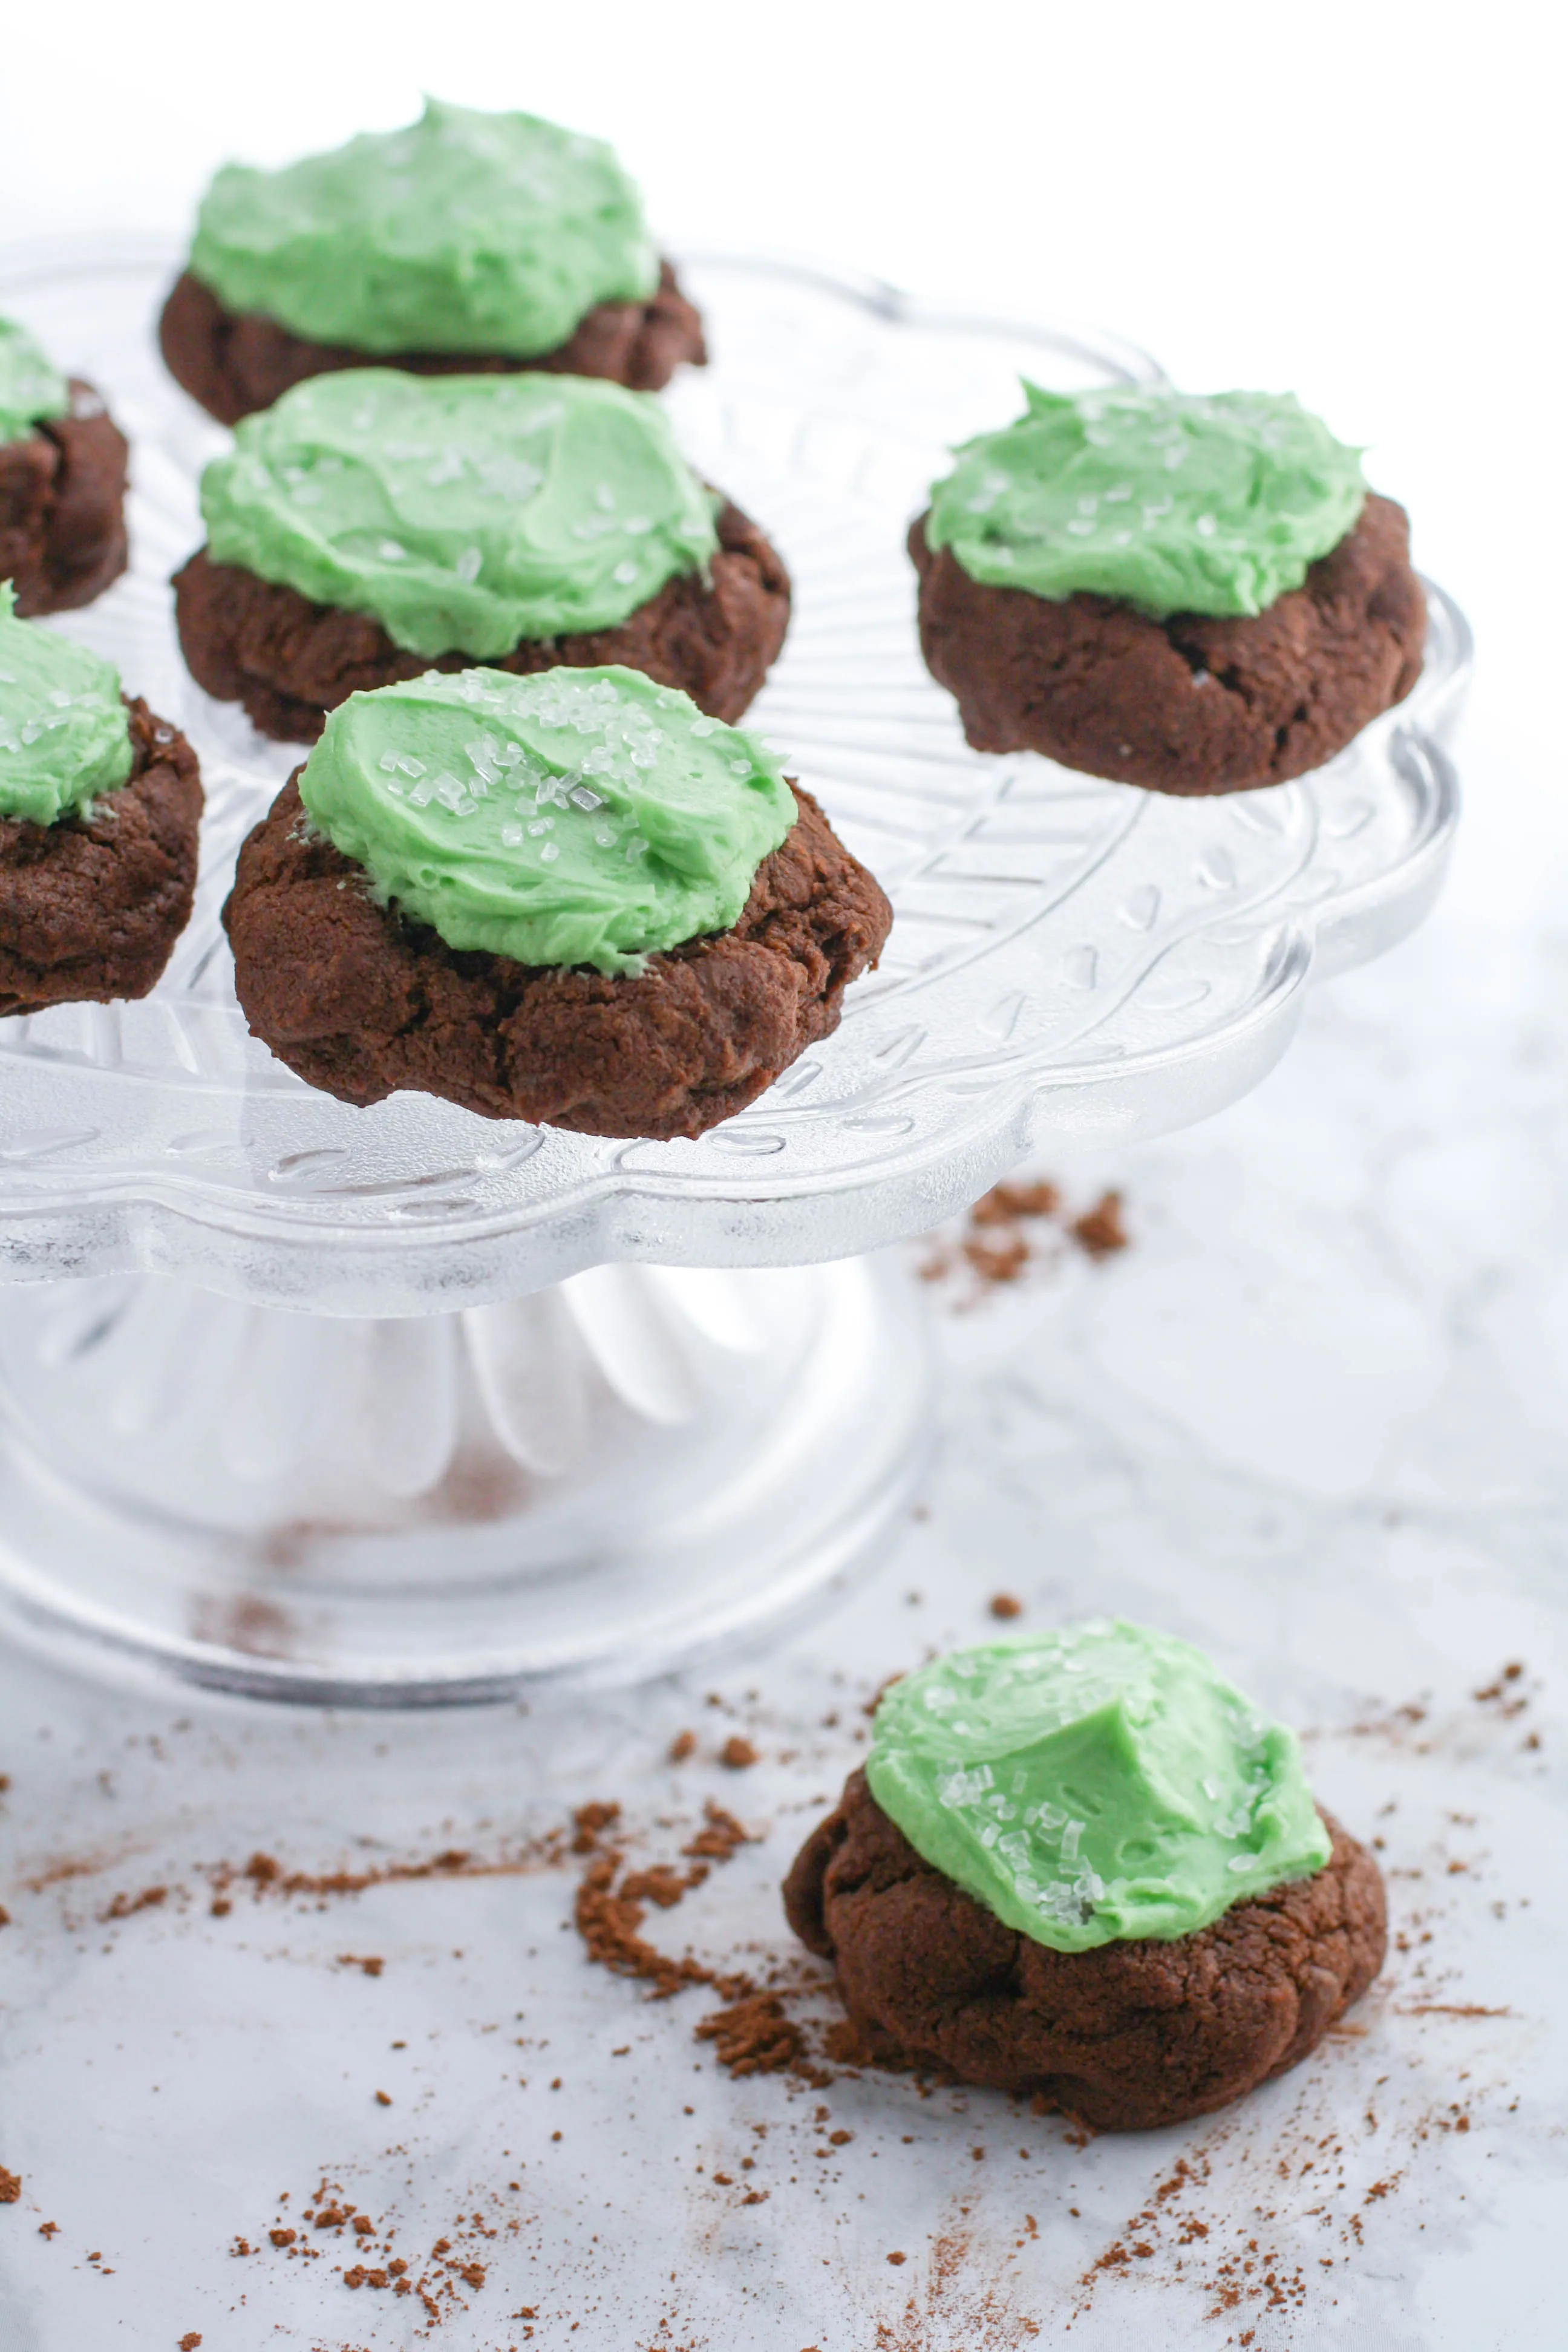 Double Chocolate Cookies with Baileys Buttercream Frosting are tasty treats that are perfect for St. Patrick's Day! You'll love Double Chocolate Cookies with Baileys Buttercream Frosting anytime of year!